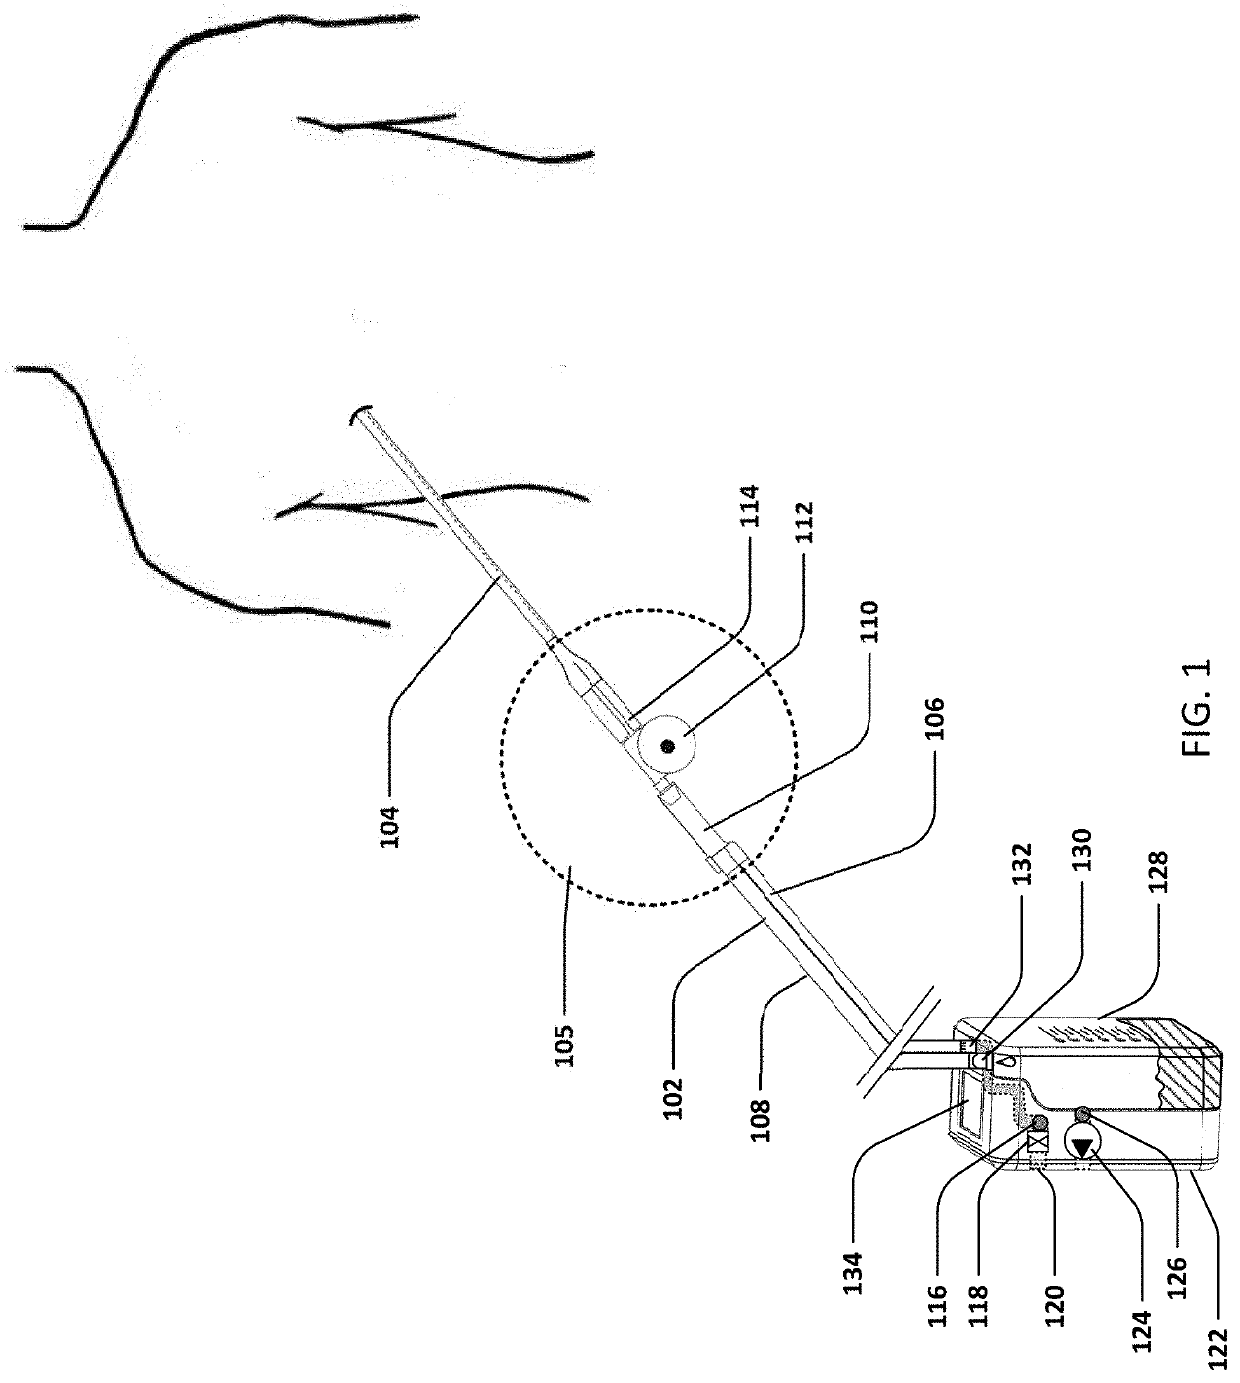 Devices and methods for managing chest or wound drainage